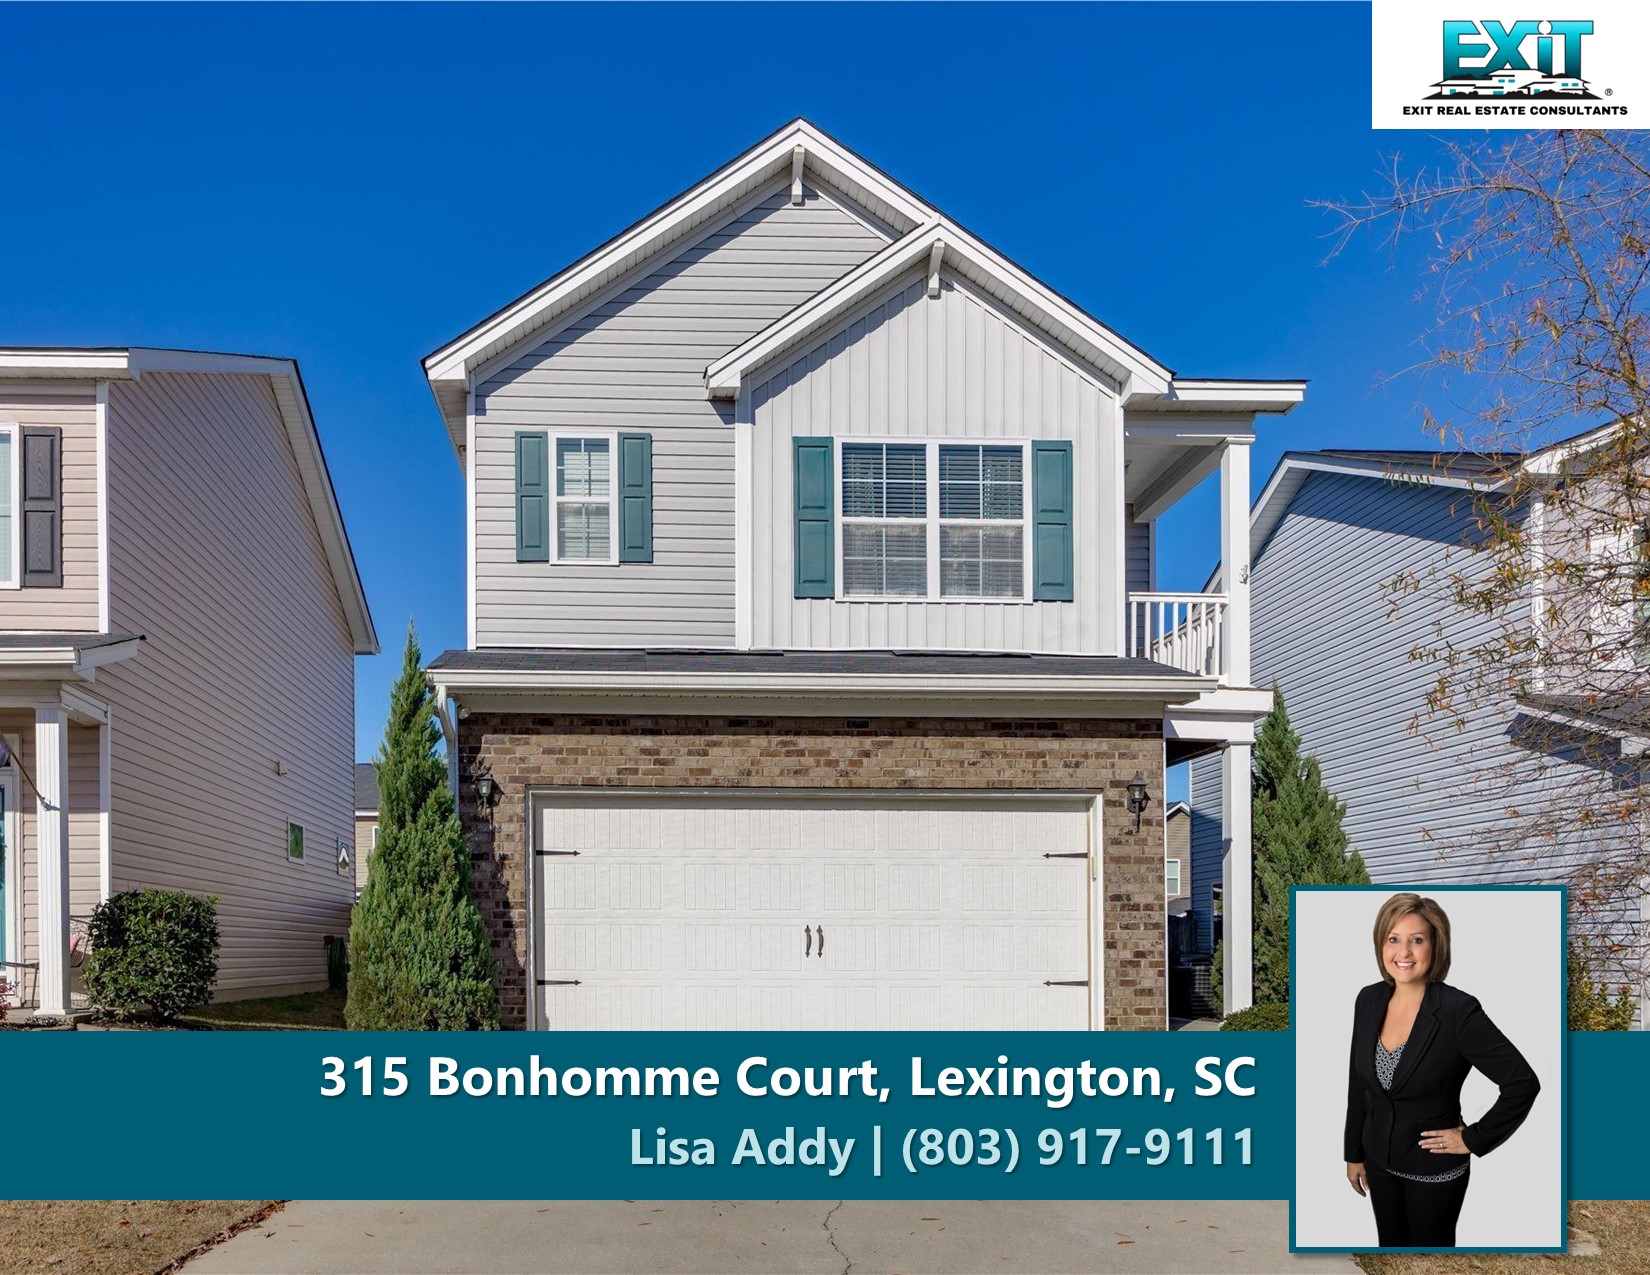 Just listed in Bonhomme Green